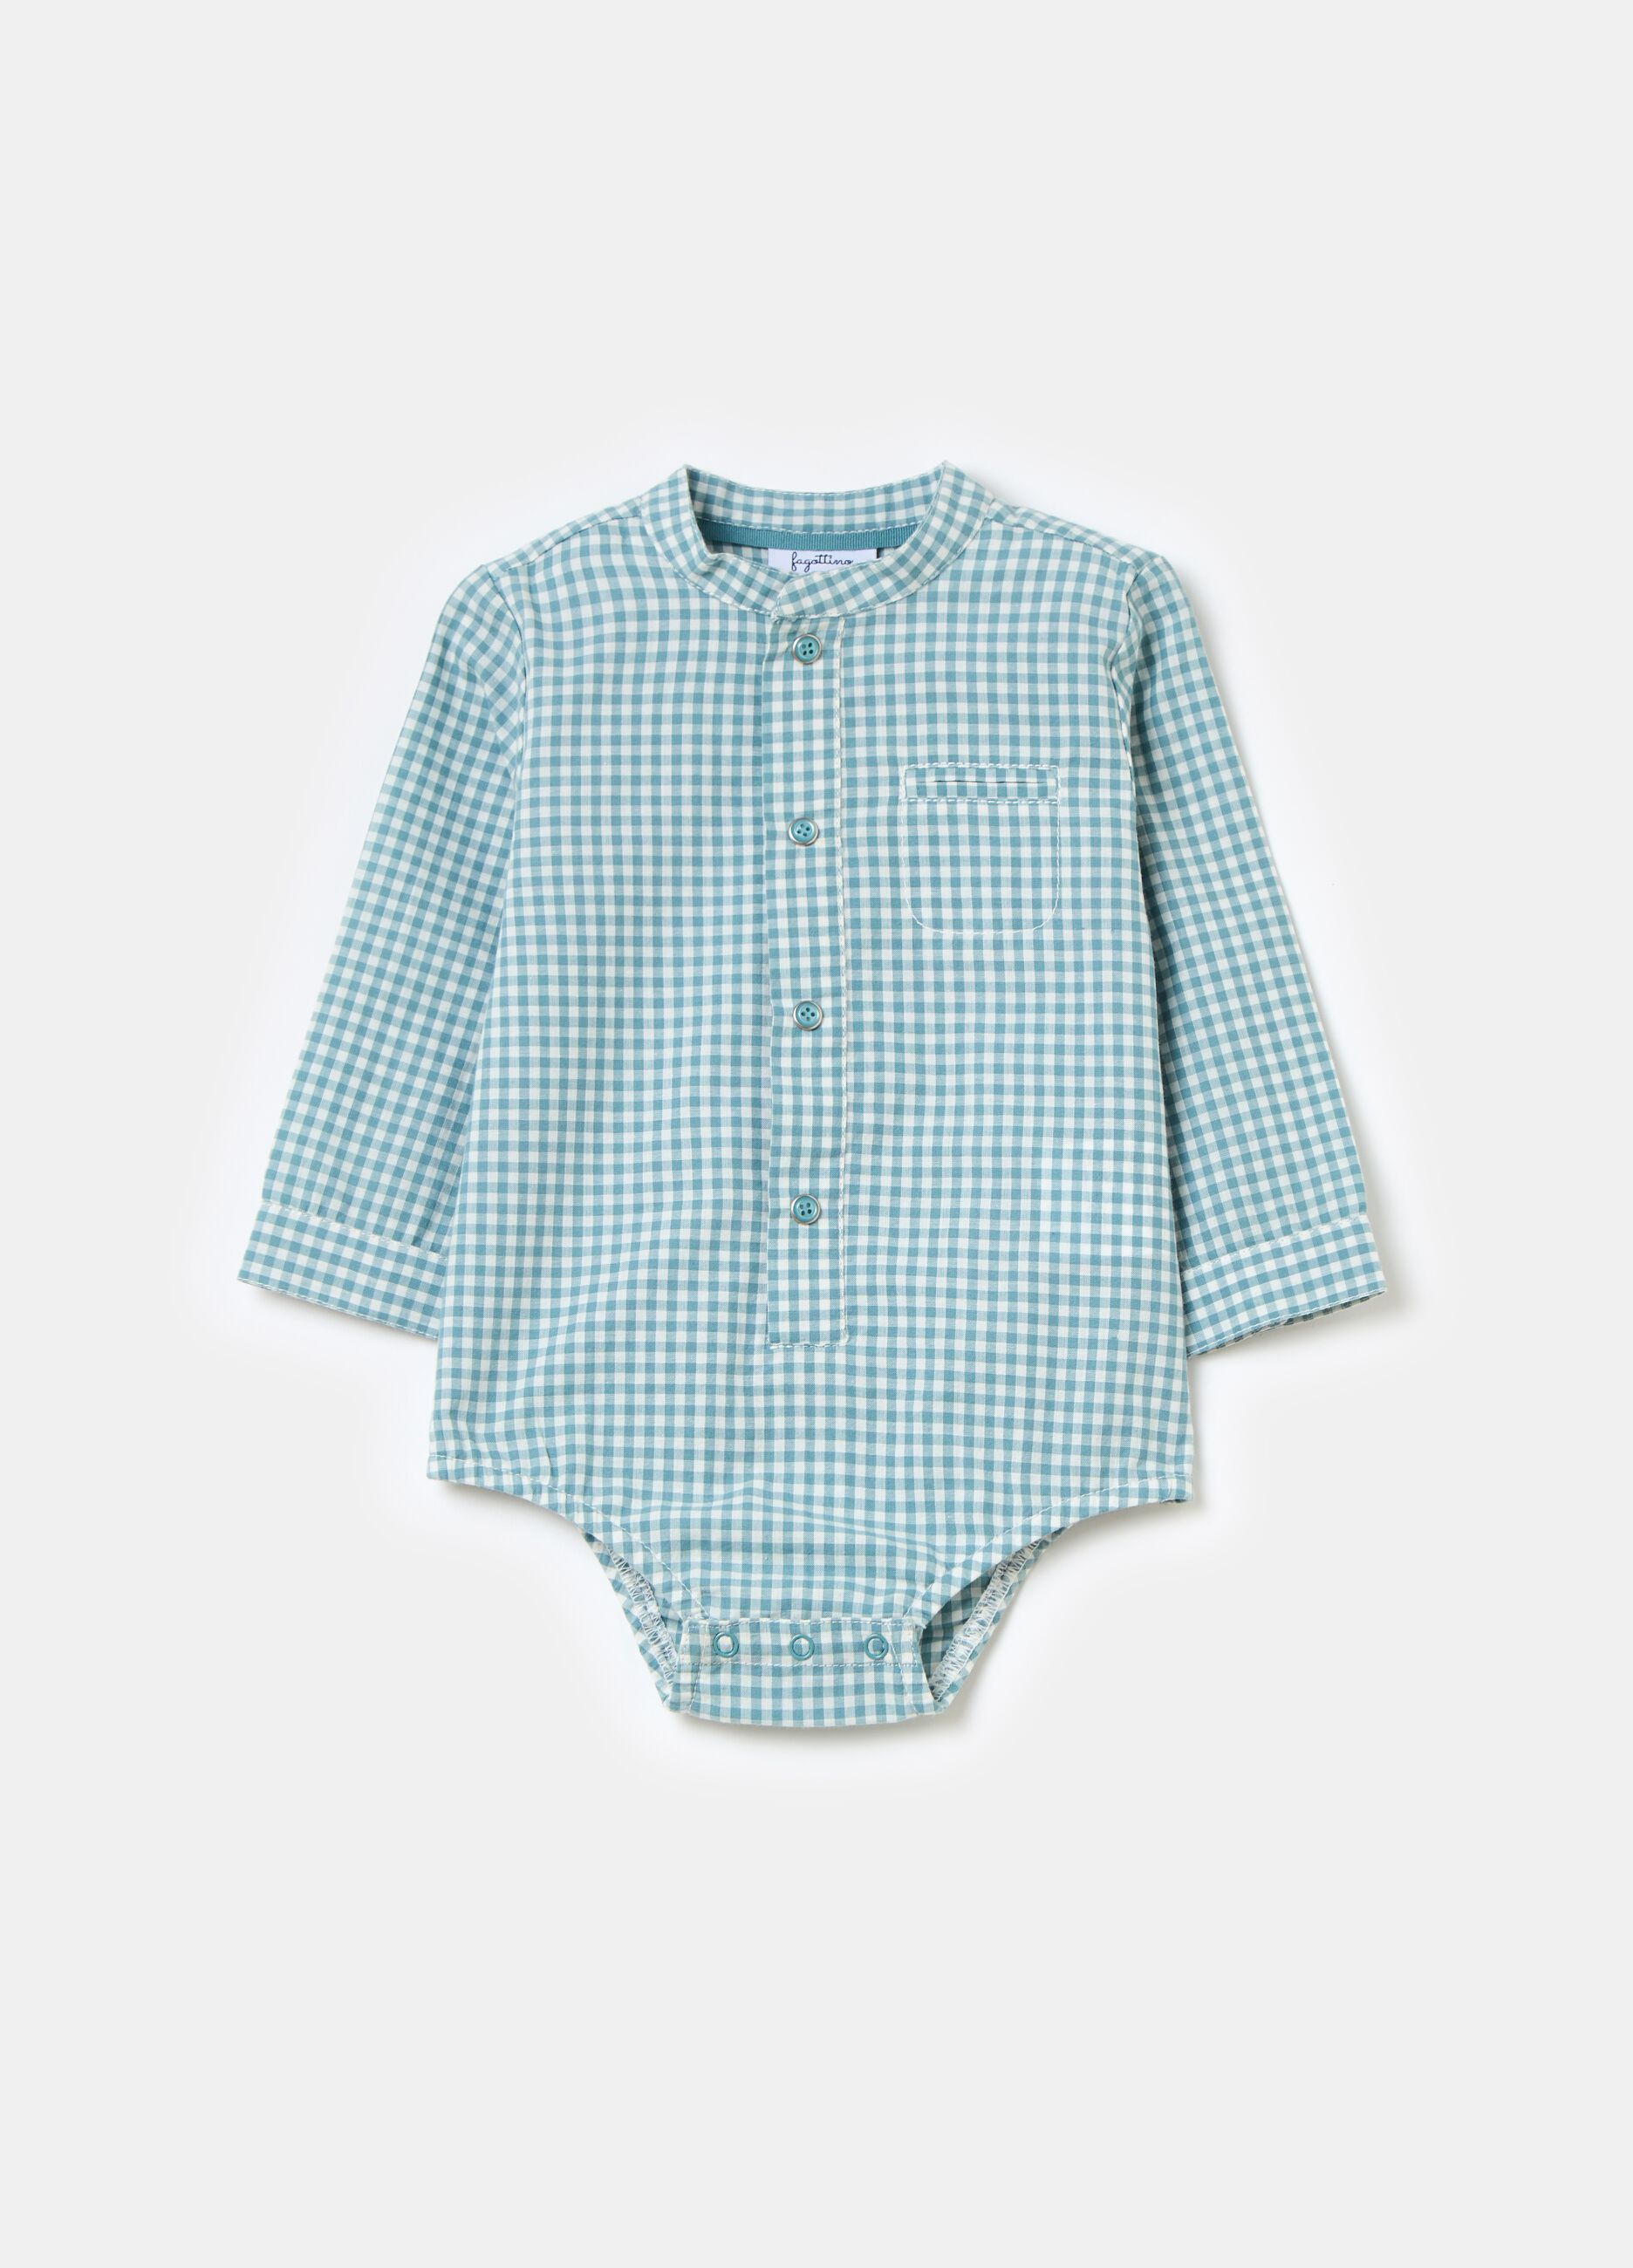 Bodysuit shirt with gingham pattern